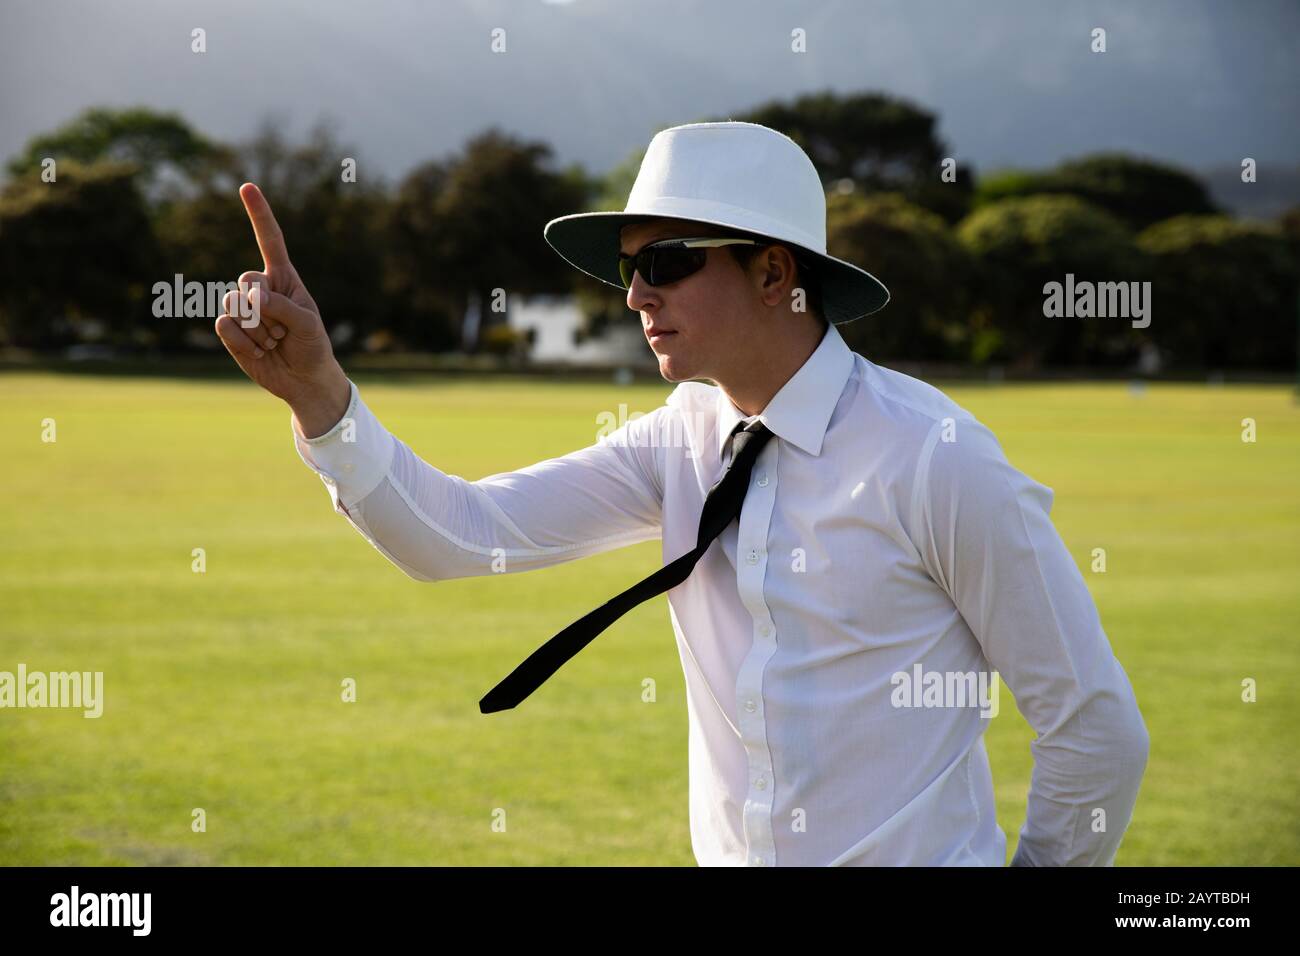 Cricket umpire making signs standing on a cricket pitch Stock Photo